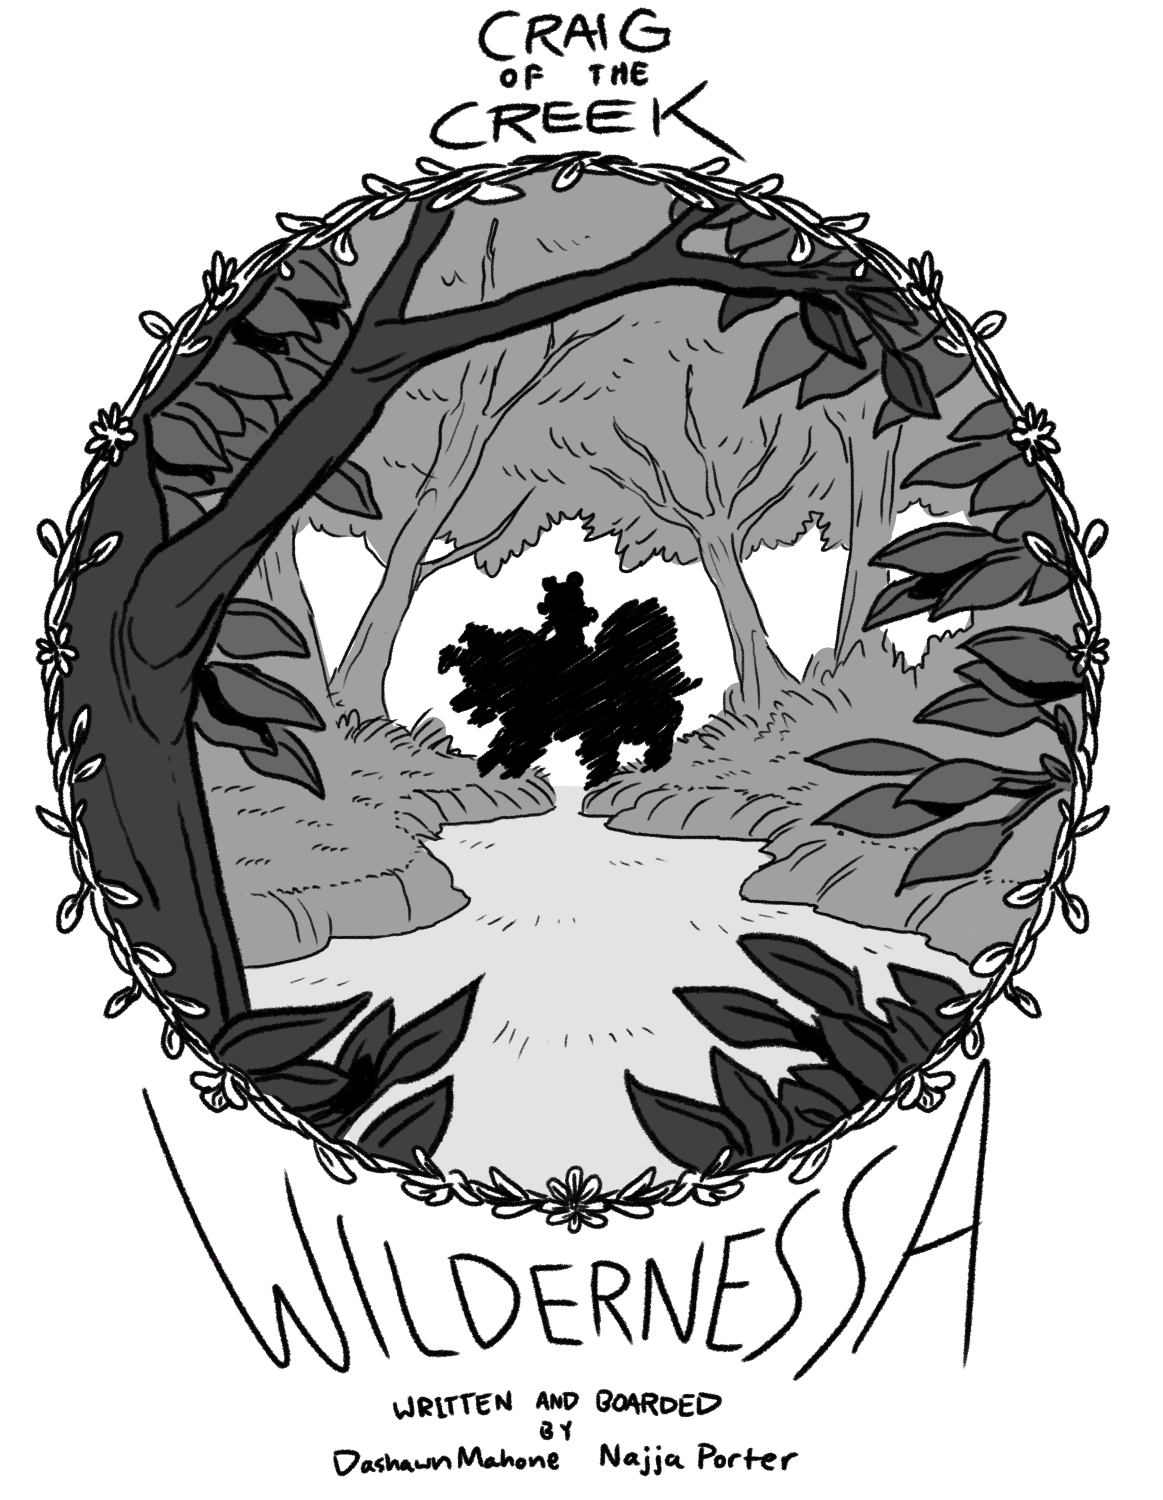 Long time, no post! Tonight at 7pm, catch the first episode that Najja Porter and I boarded for Craig of the Creek! It’s called Wildernessa~~